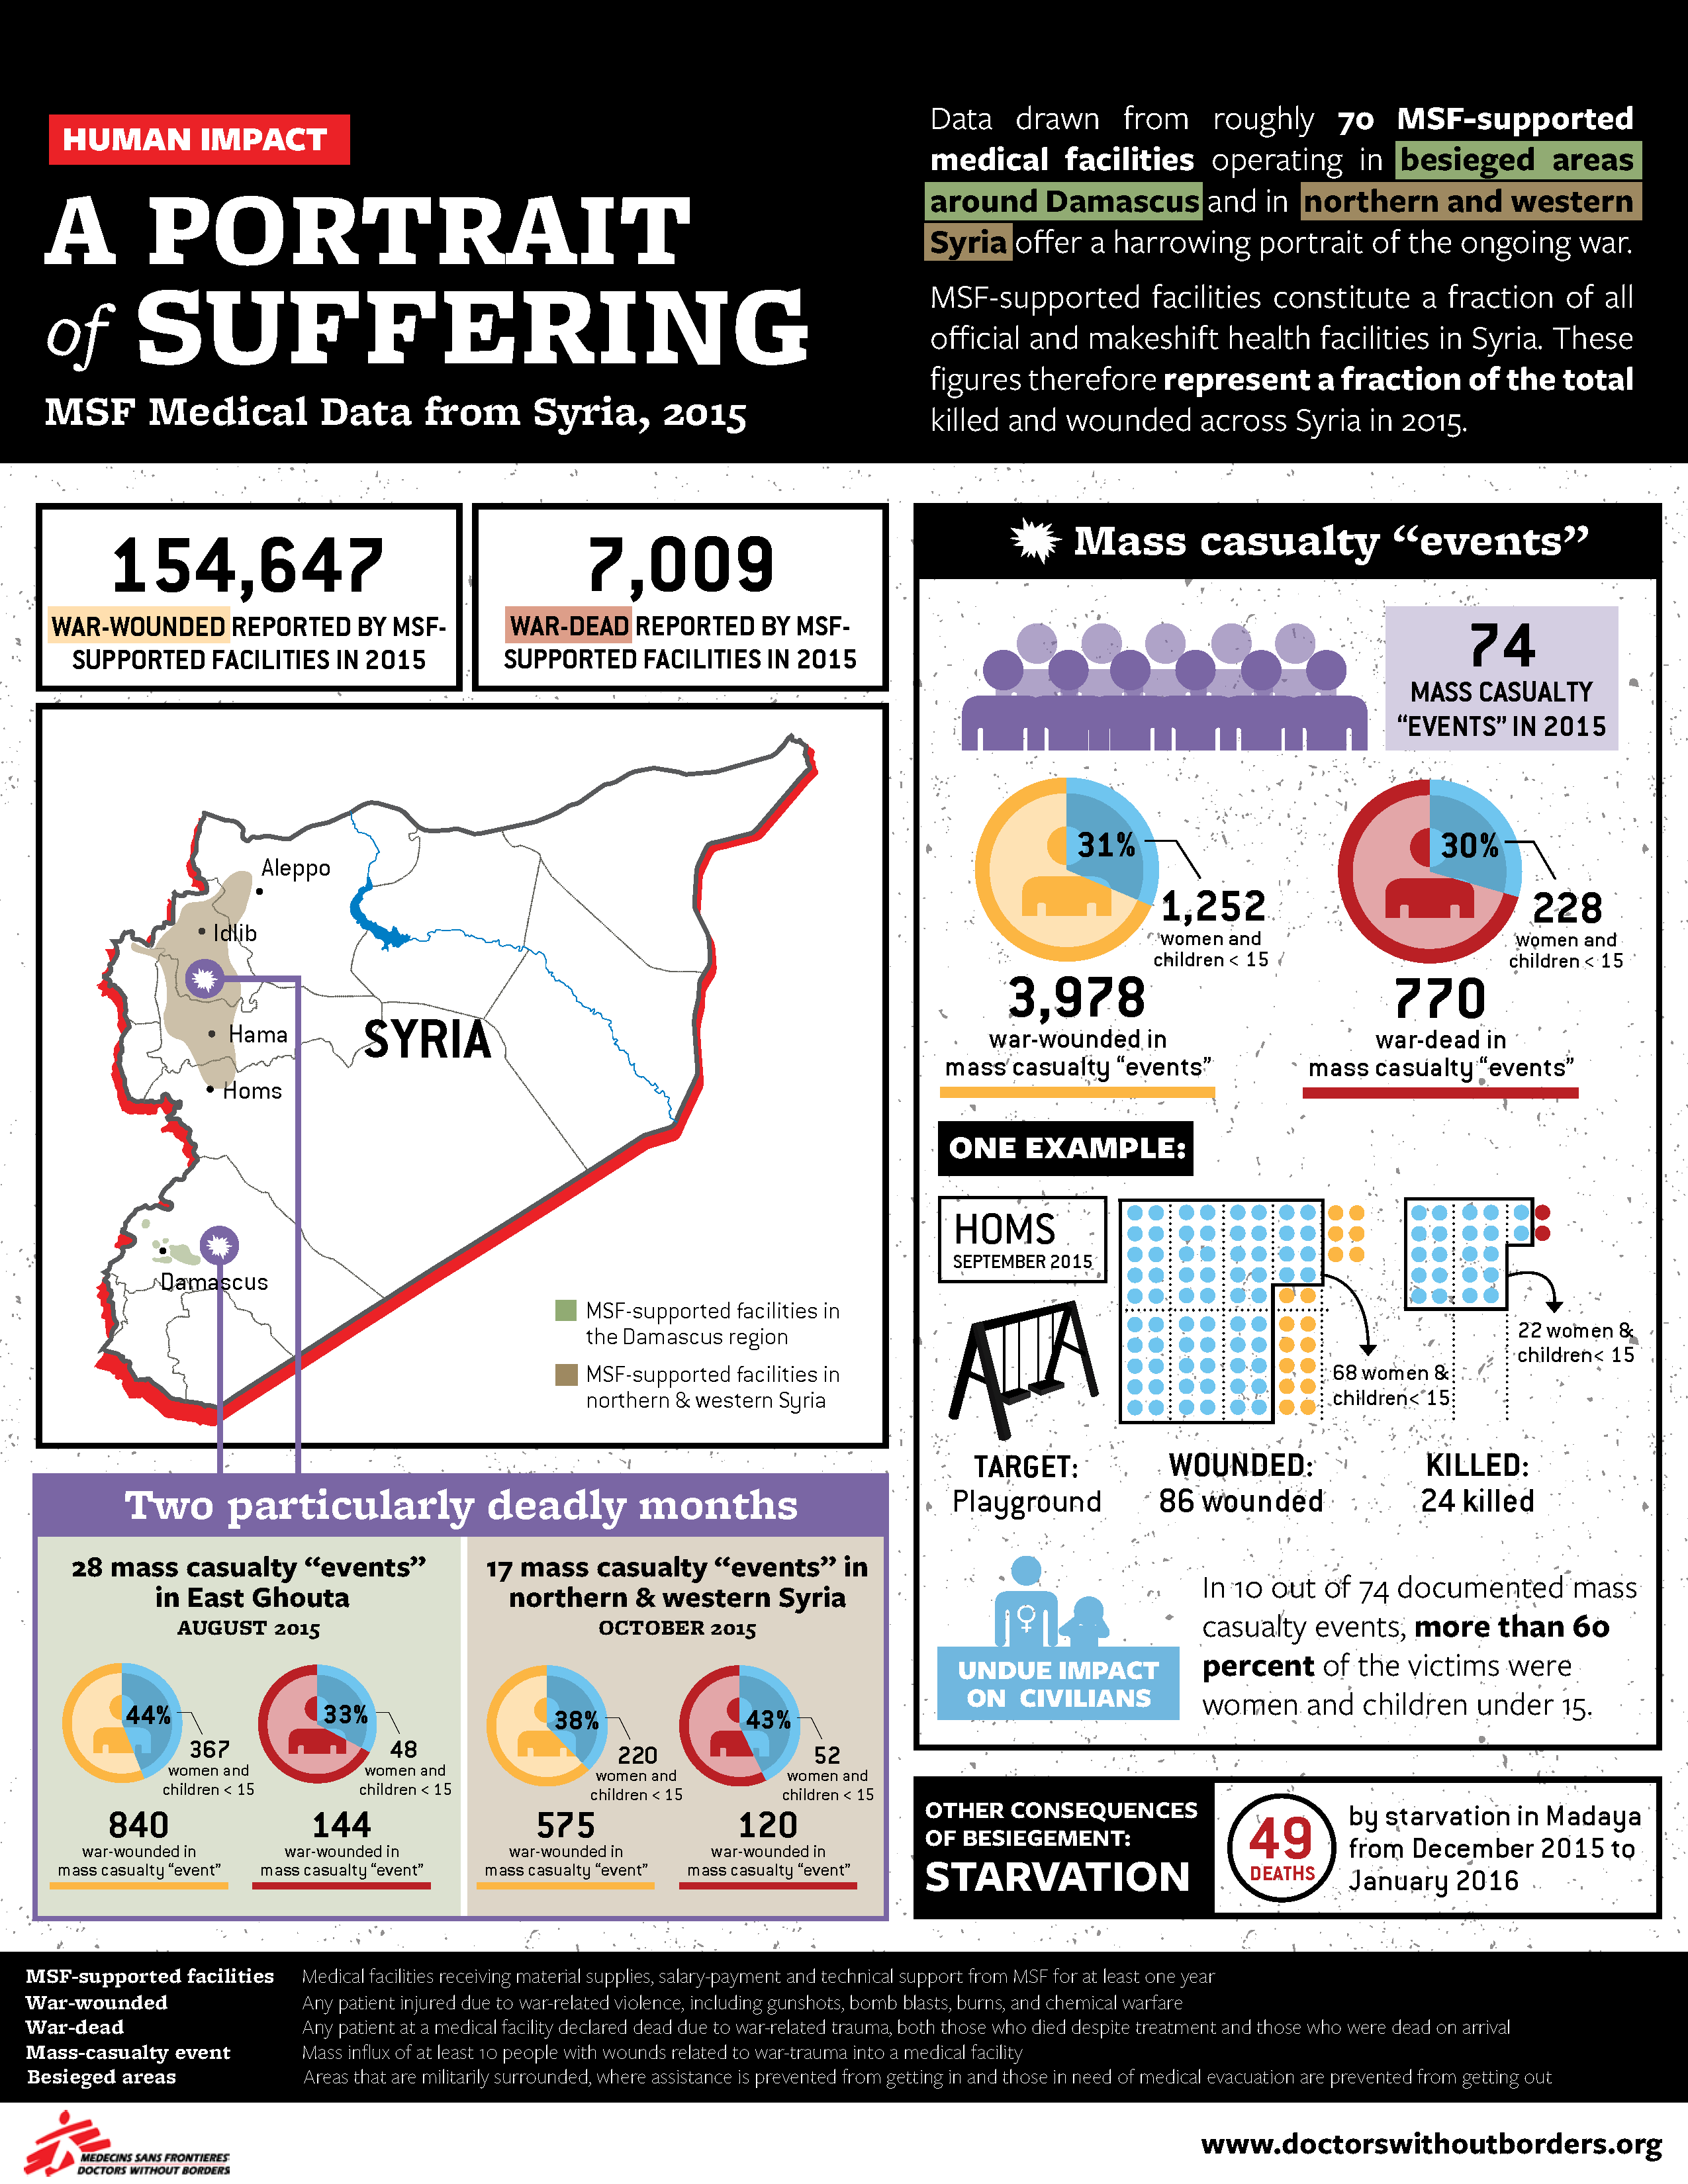 Syria: A Portrait of Suffering